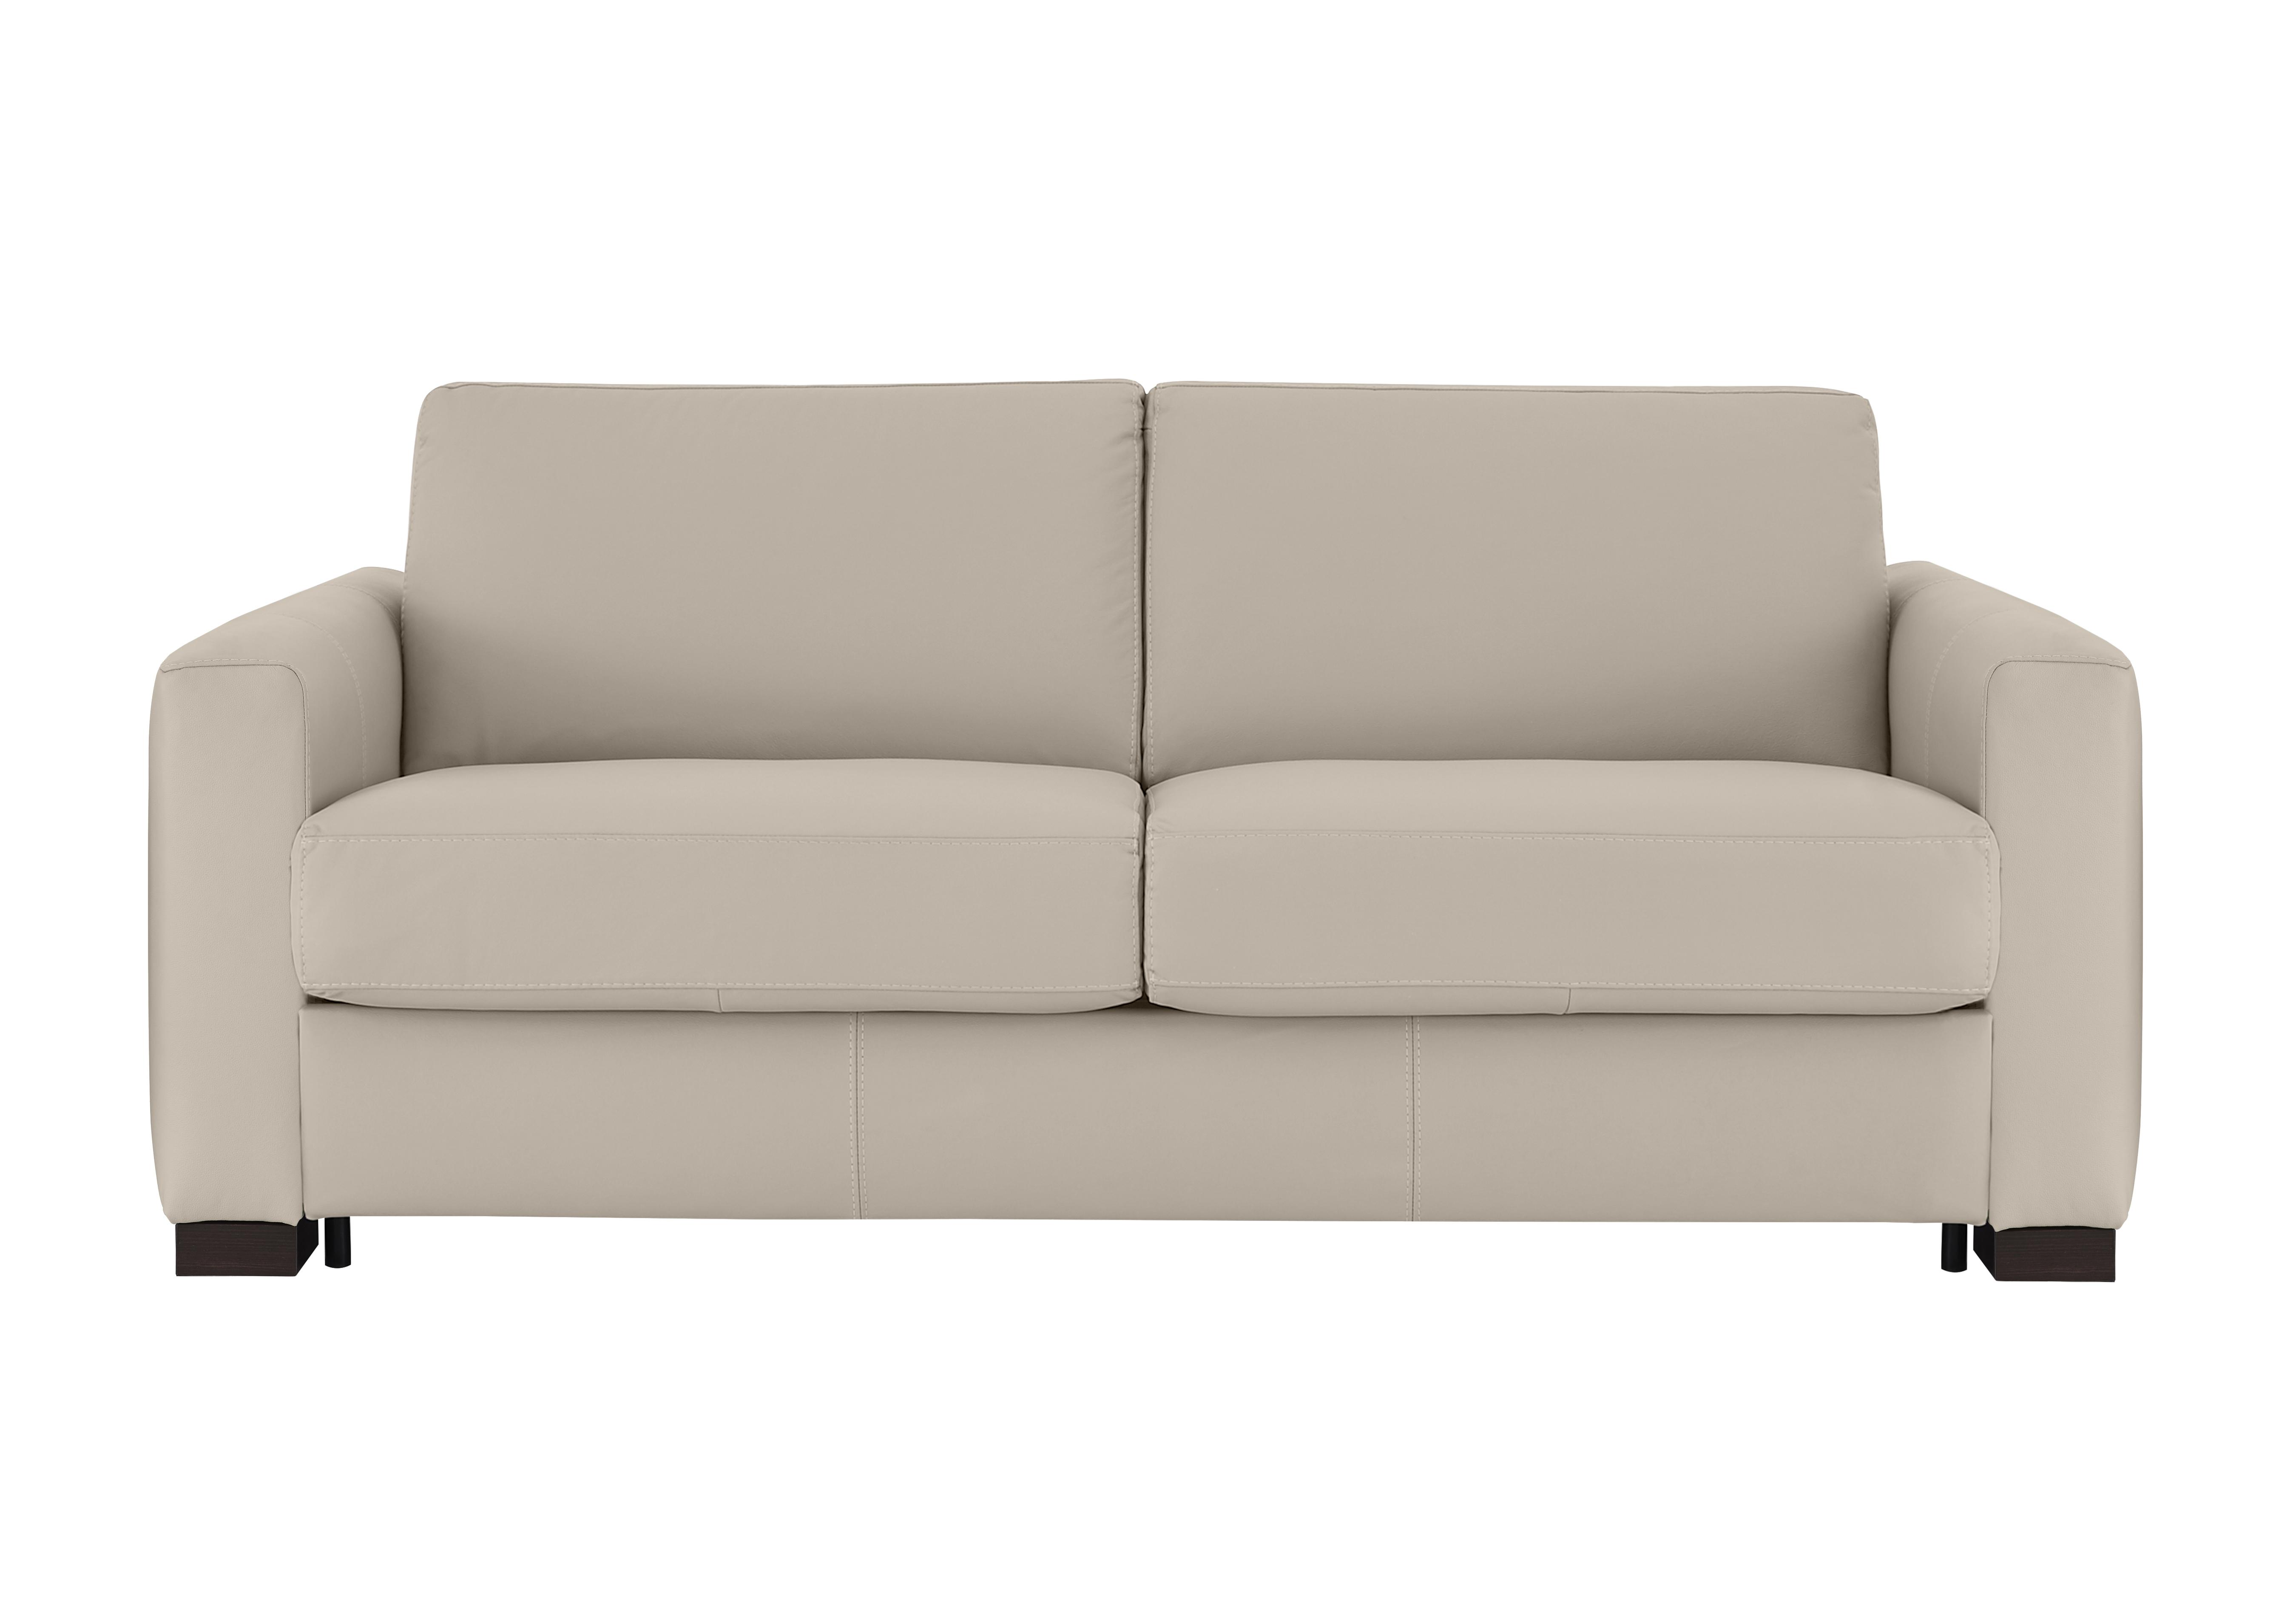 Alcova 3 Seater Leather Sofa Bed with Box Arms in Botero Crema 2156 on Furniture Village